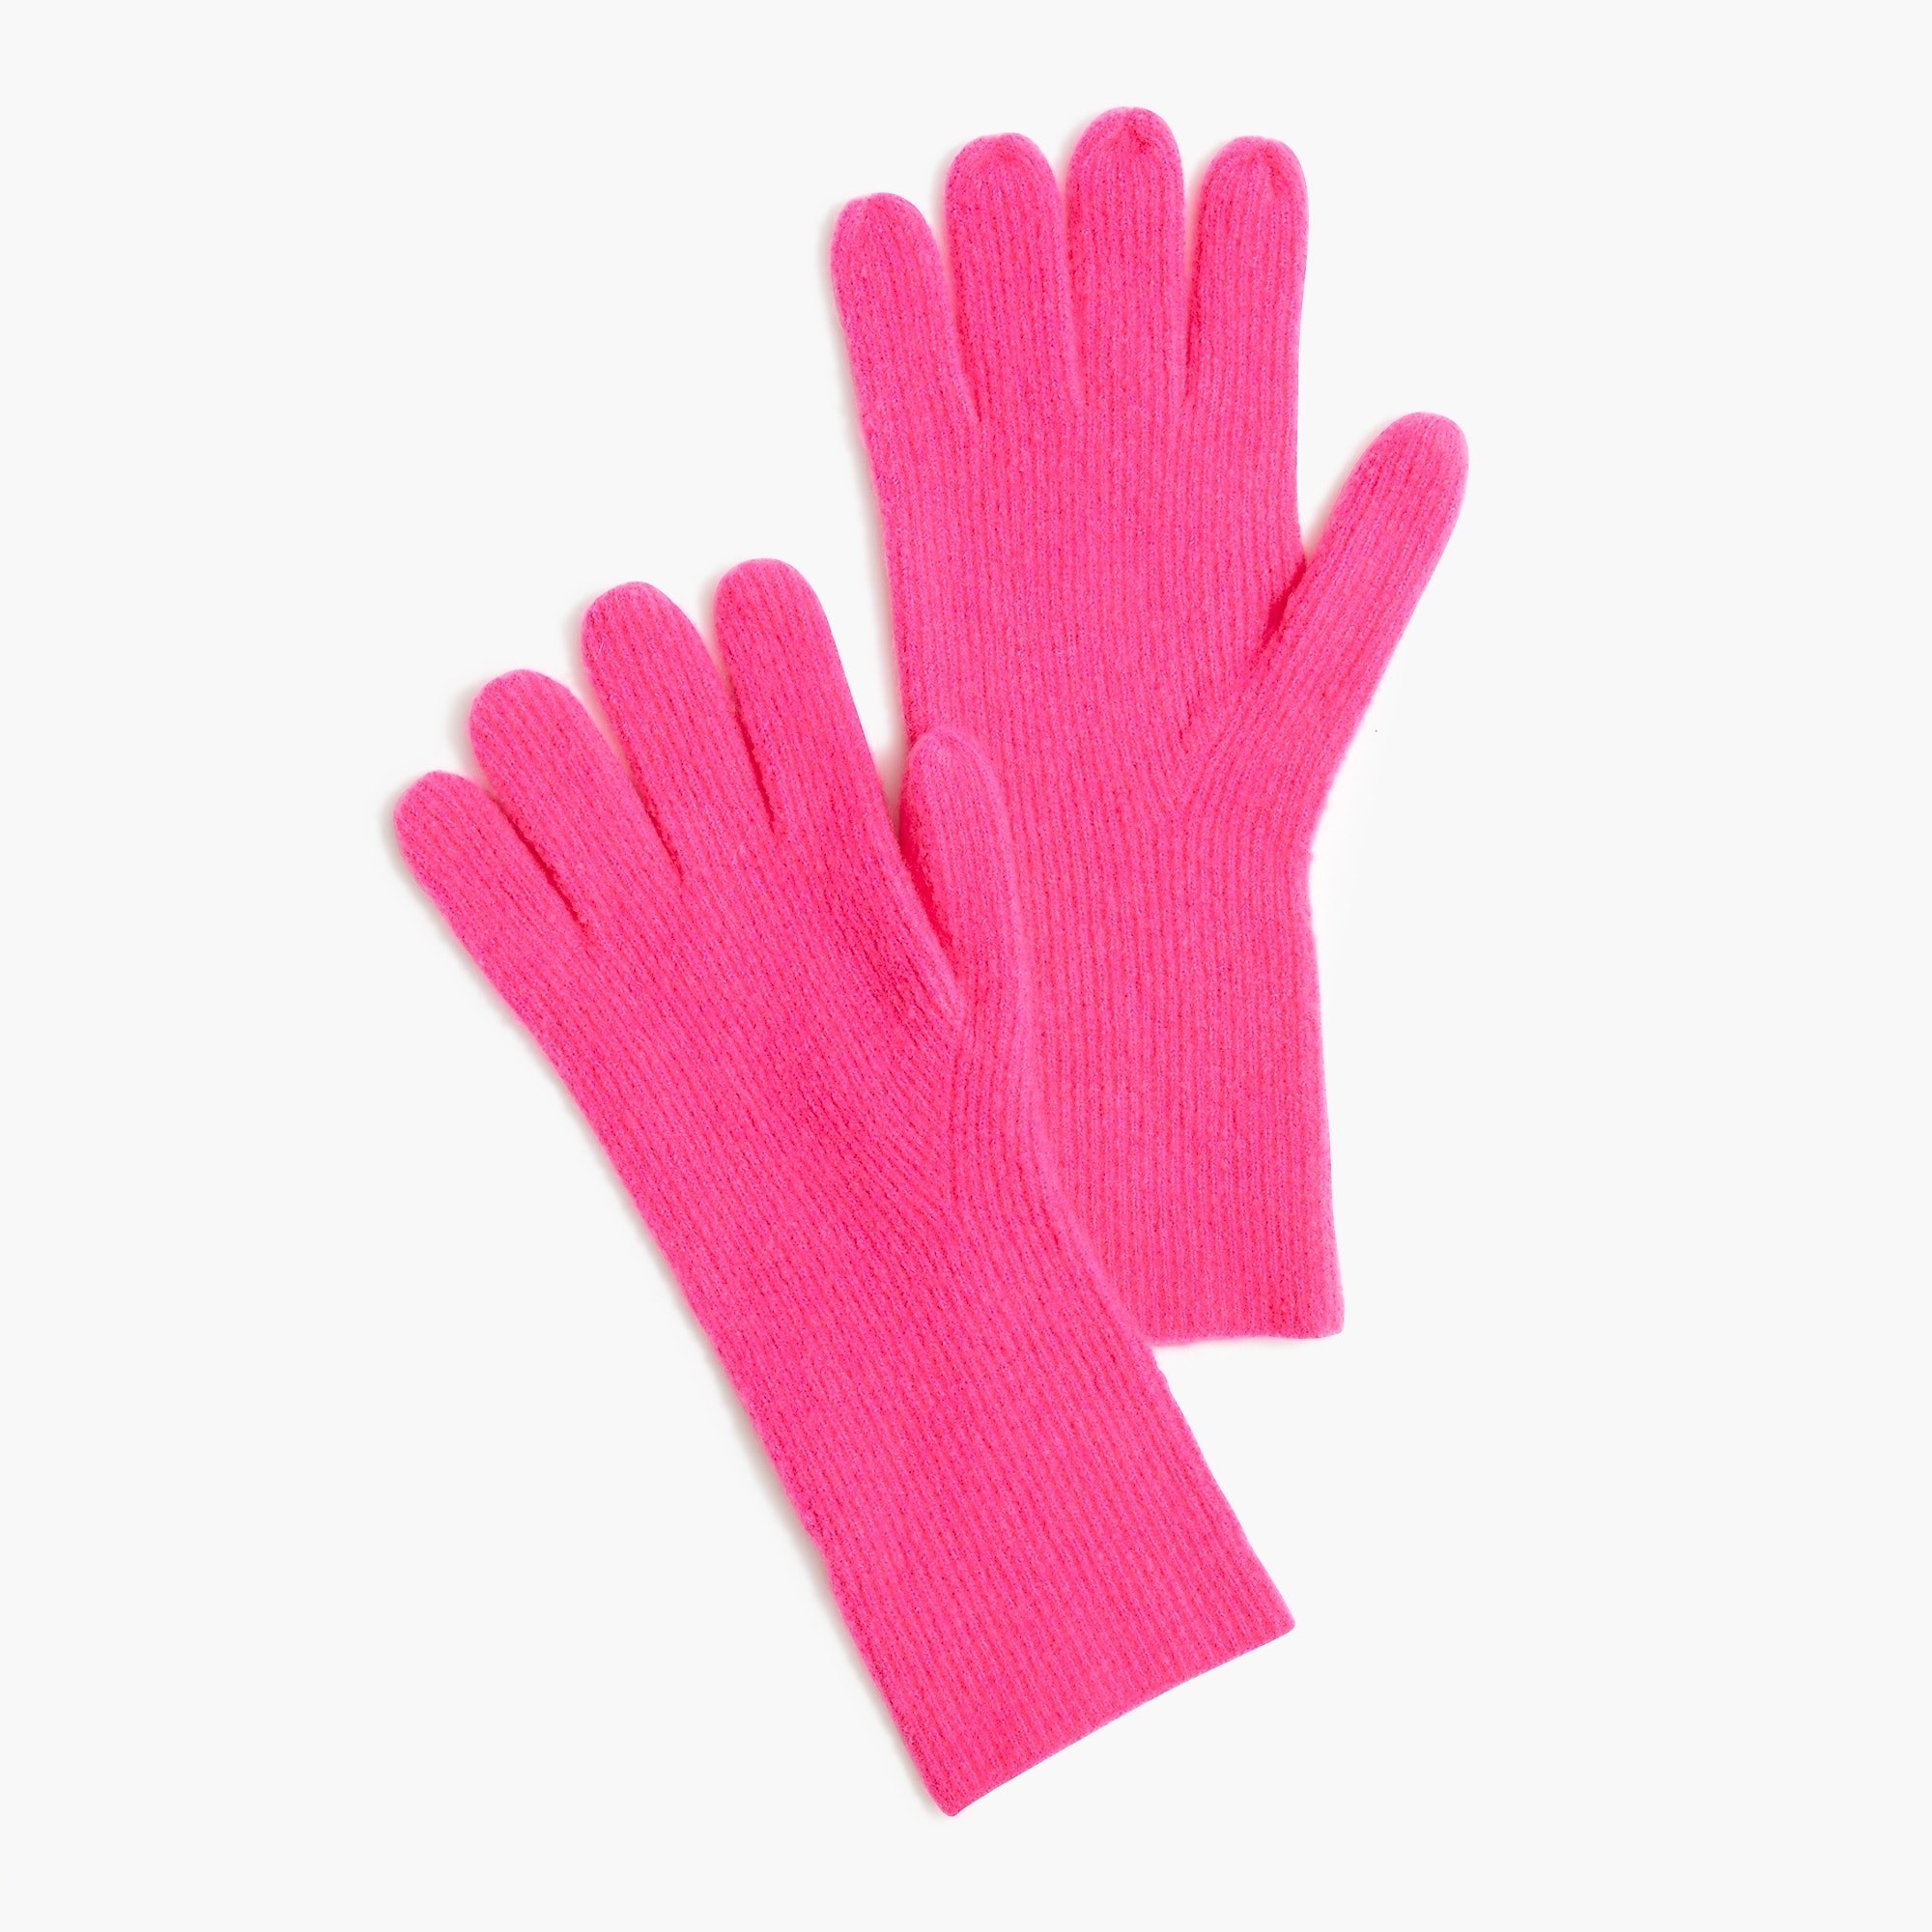 Aa pair of neon pink long gloves